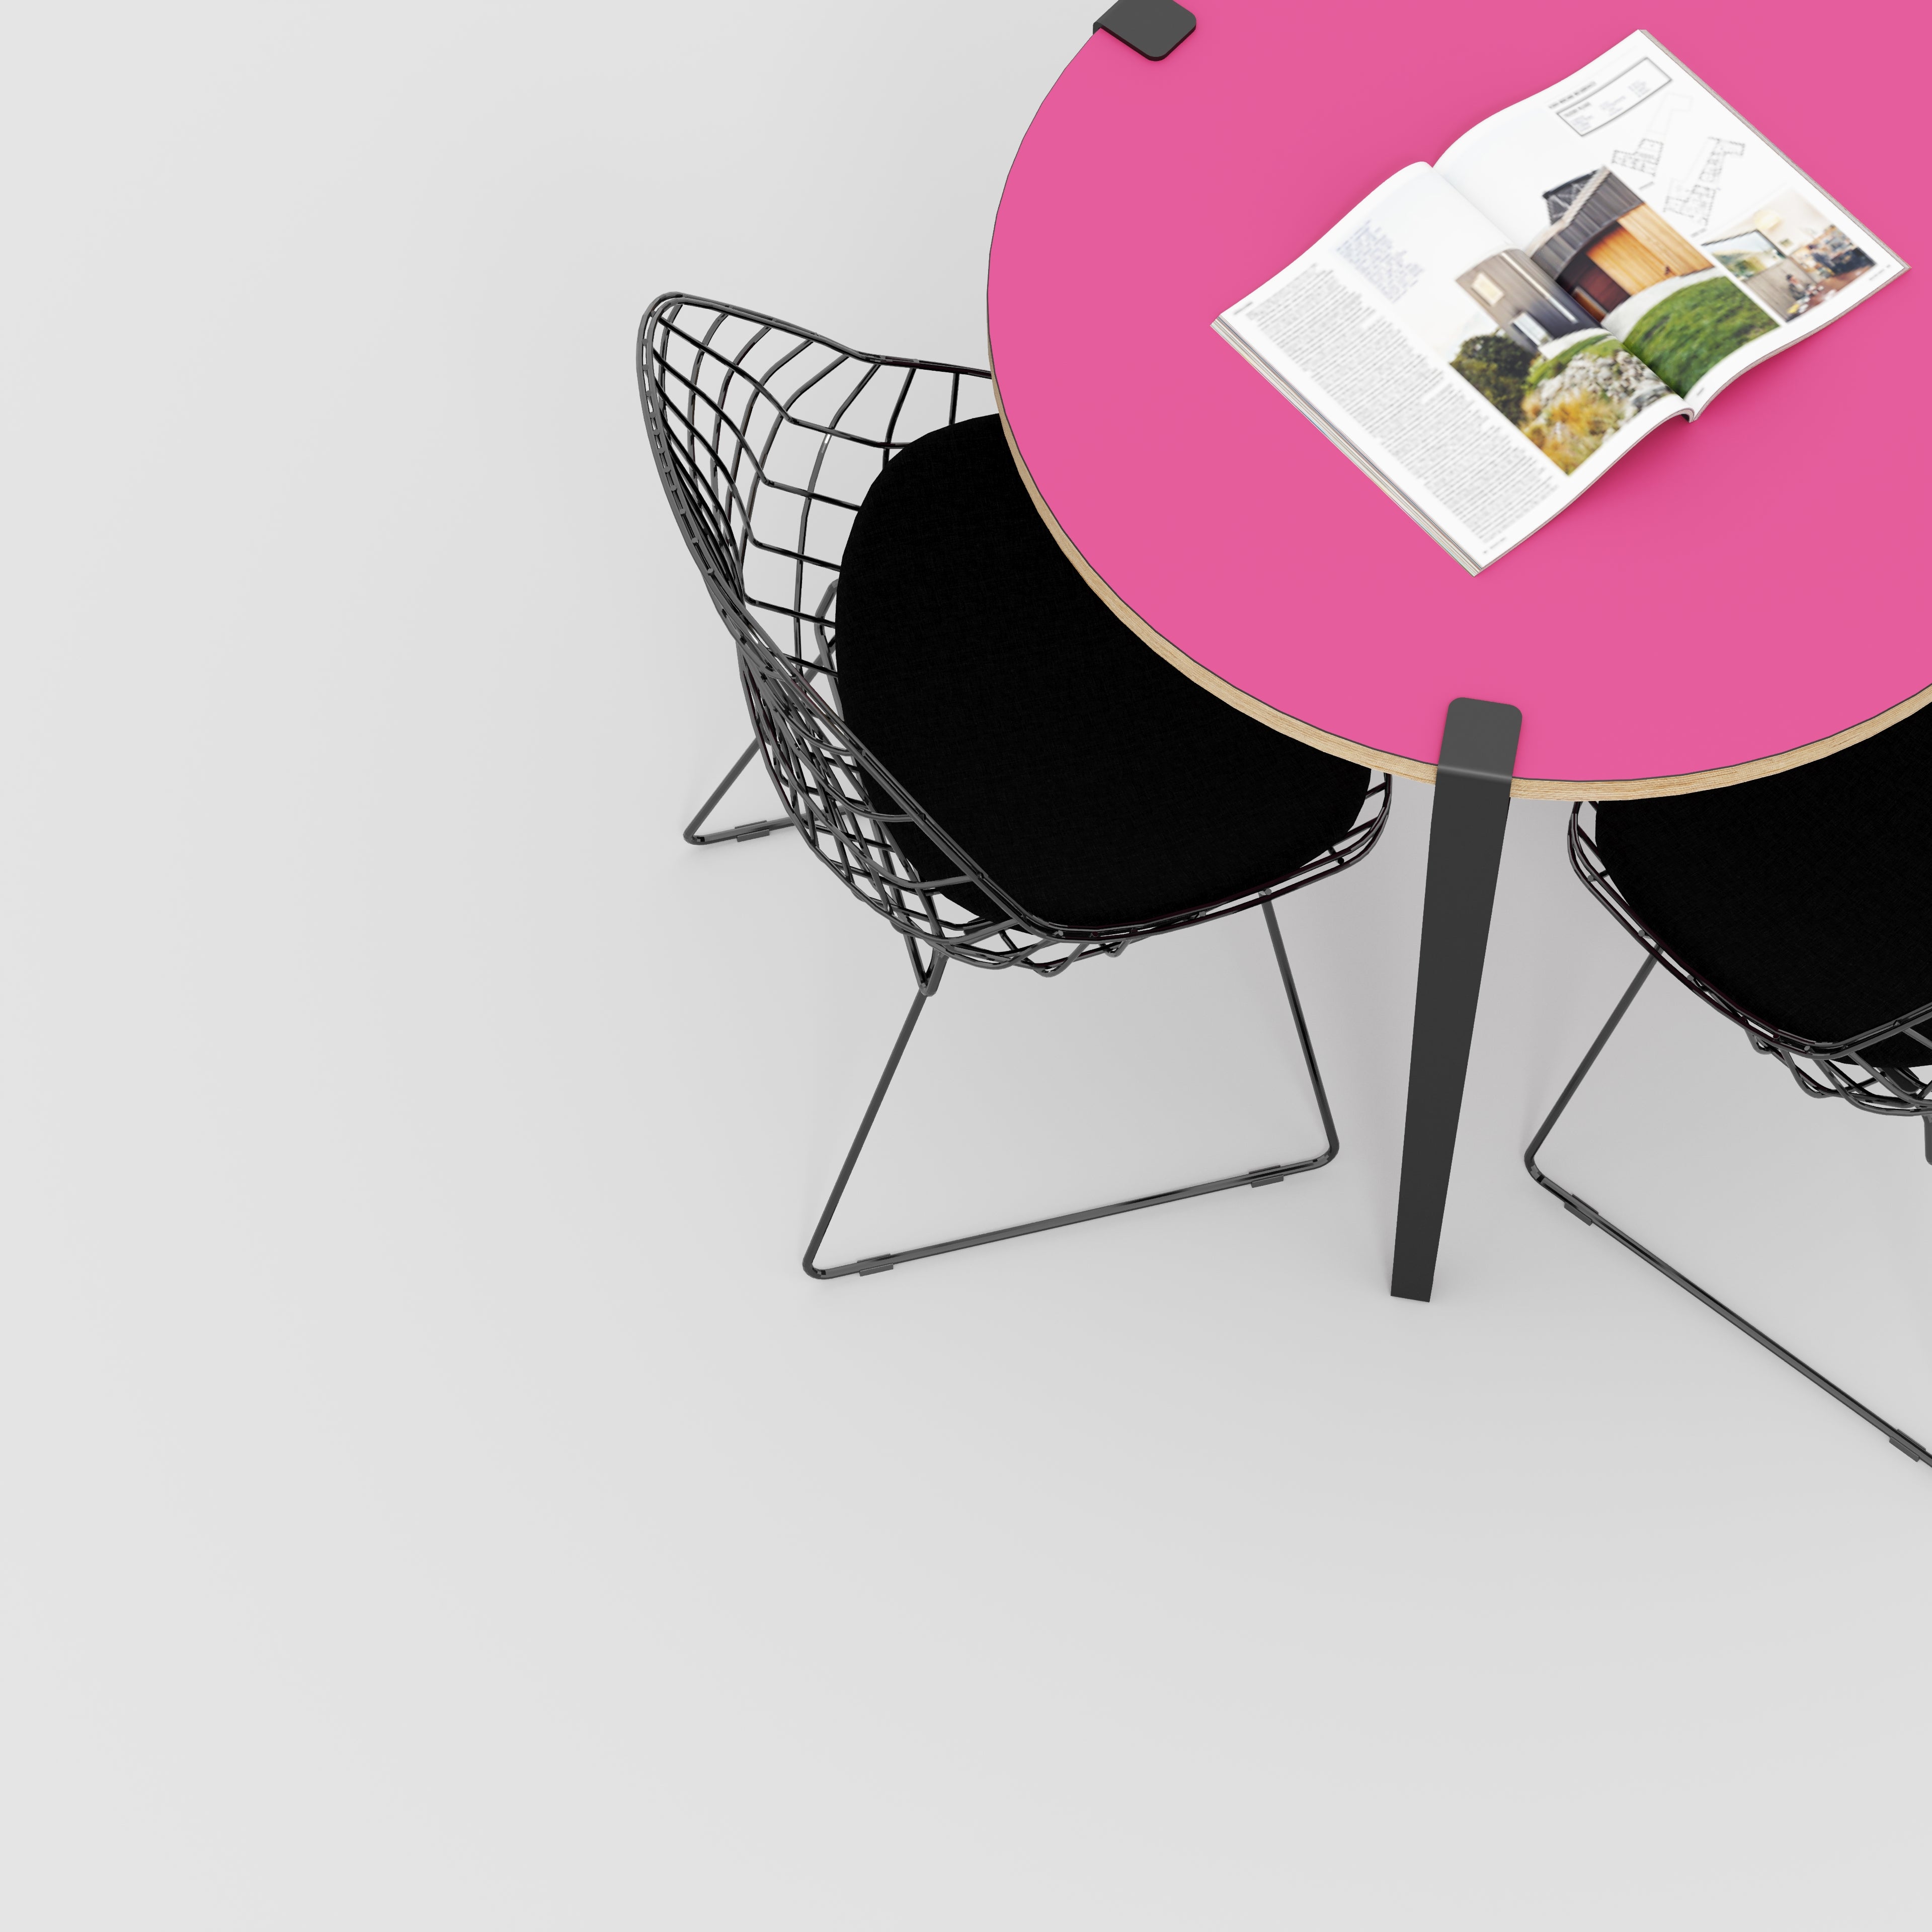 Round Table with Black Tiptoe Legs - Formica Juicy Pink - 800(dia) x 750(h)